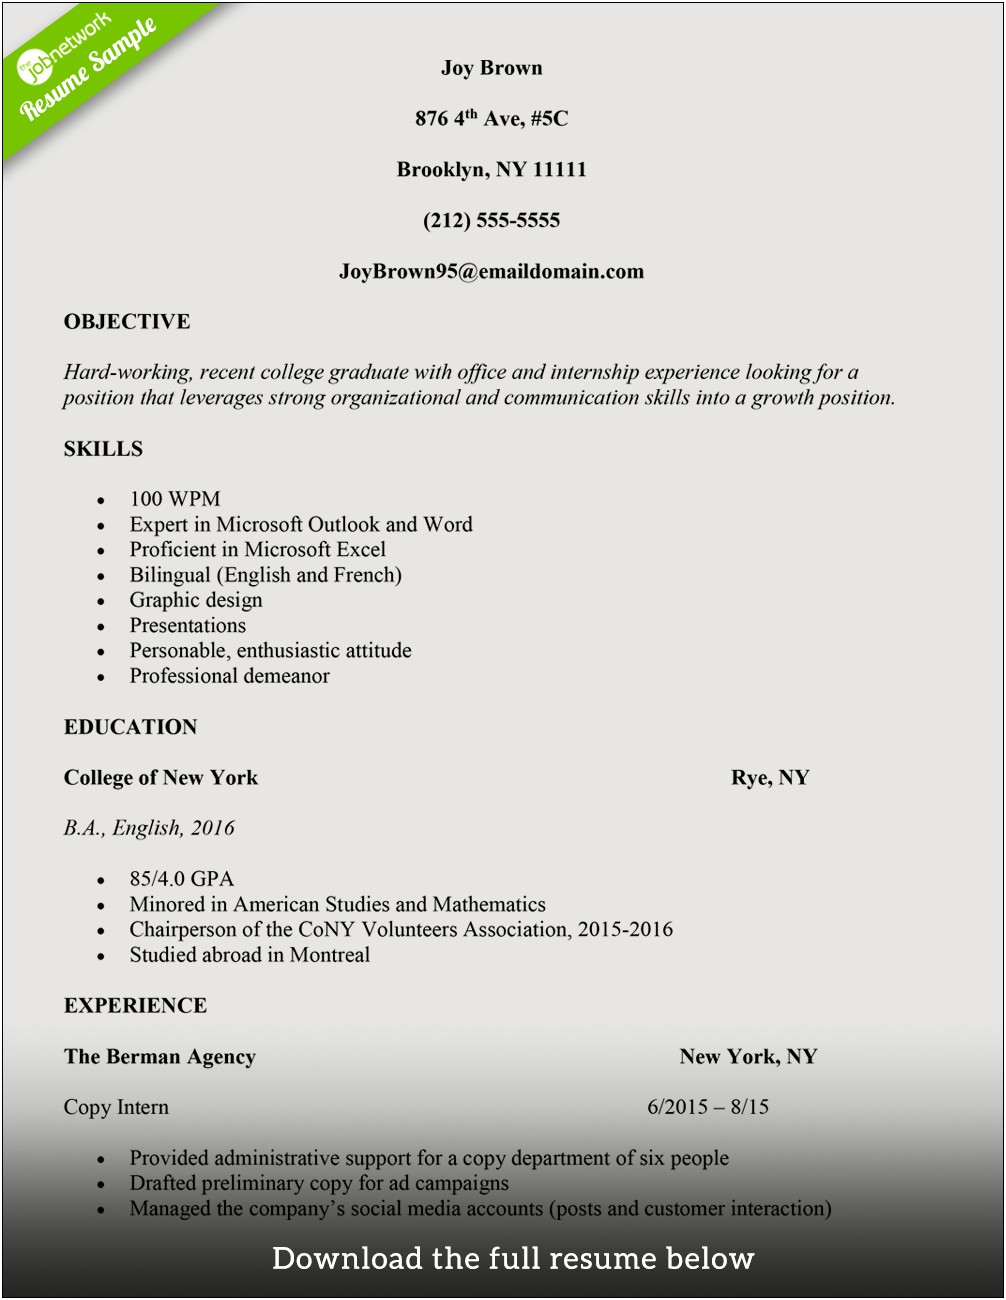 Sample Functional Resume For Executive Assistant